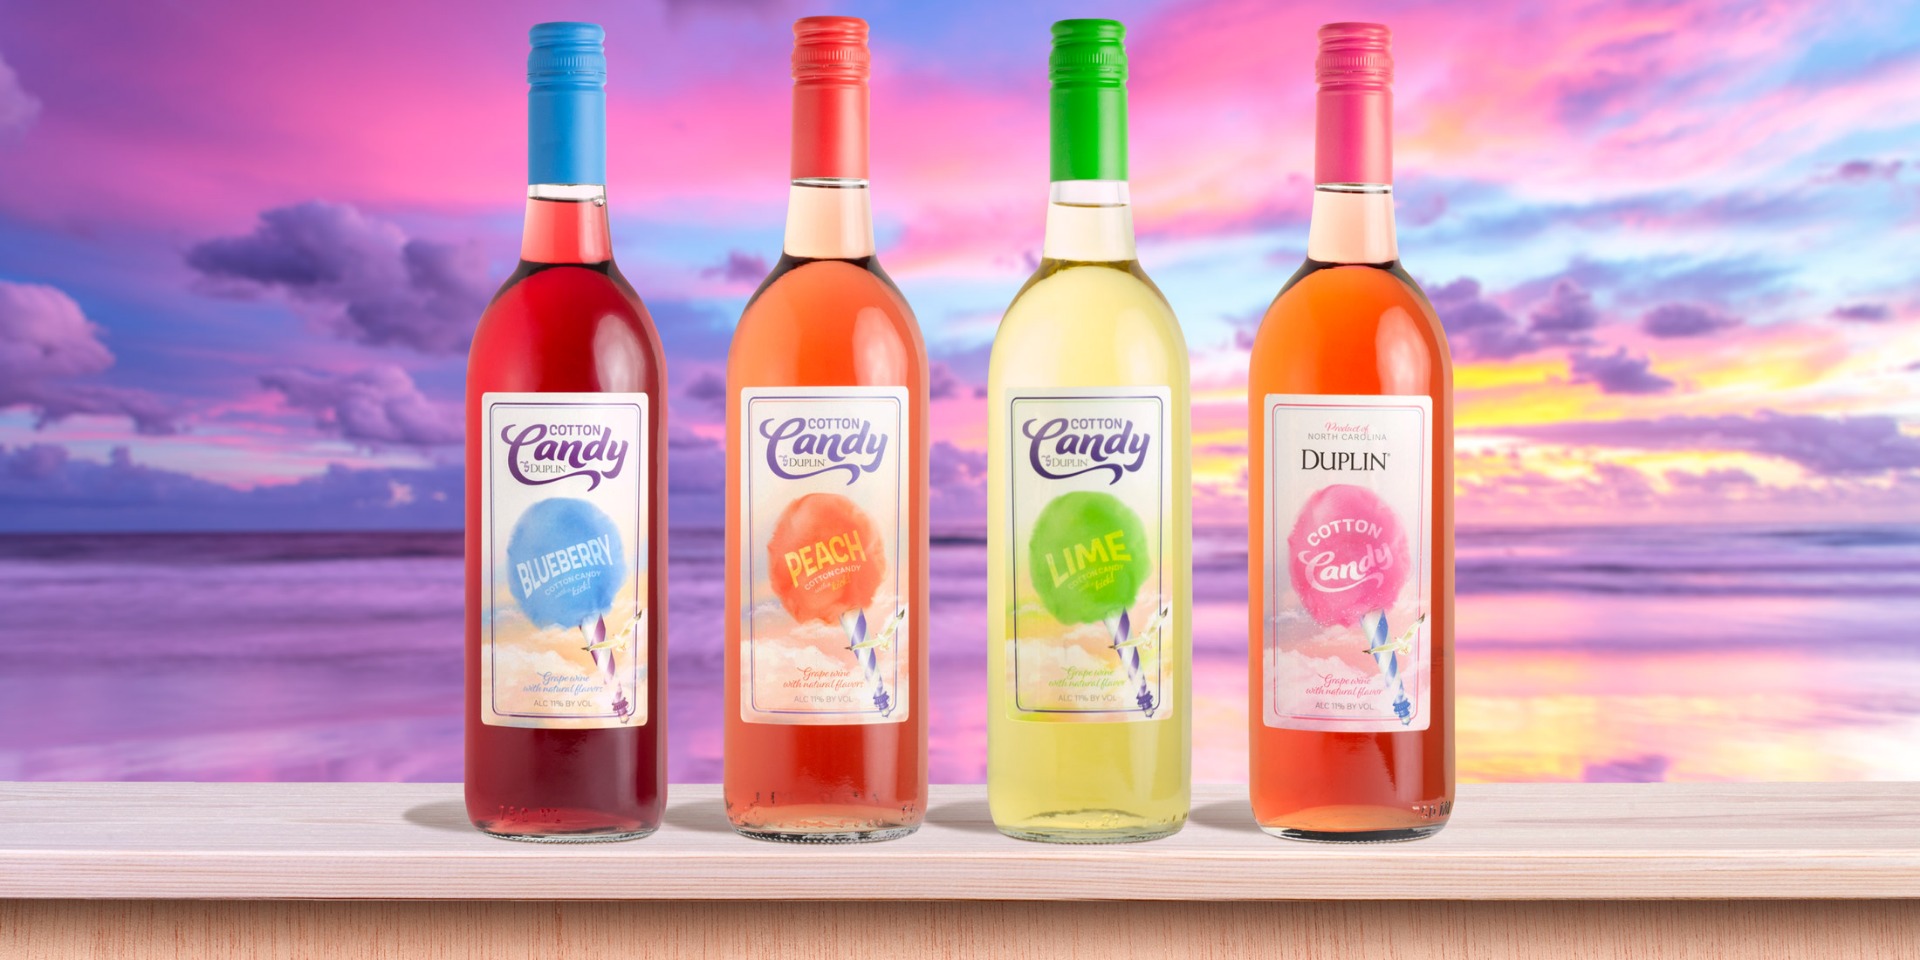 Duplin Cotton Candy wine flavors are Blueberry, Peach, Lime and Original 